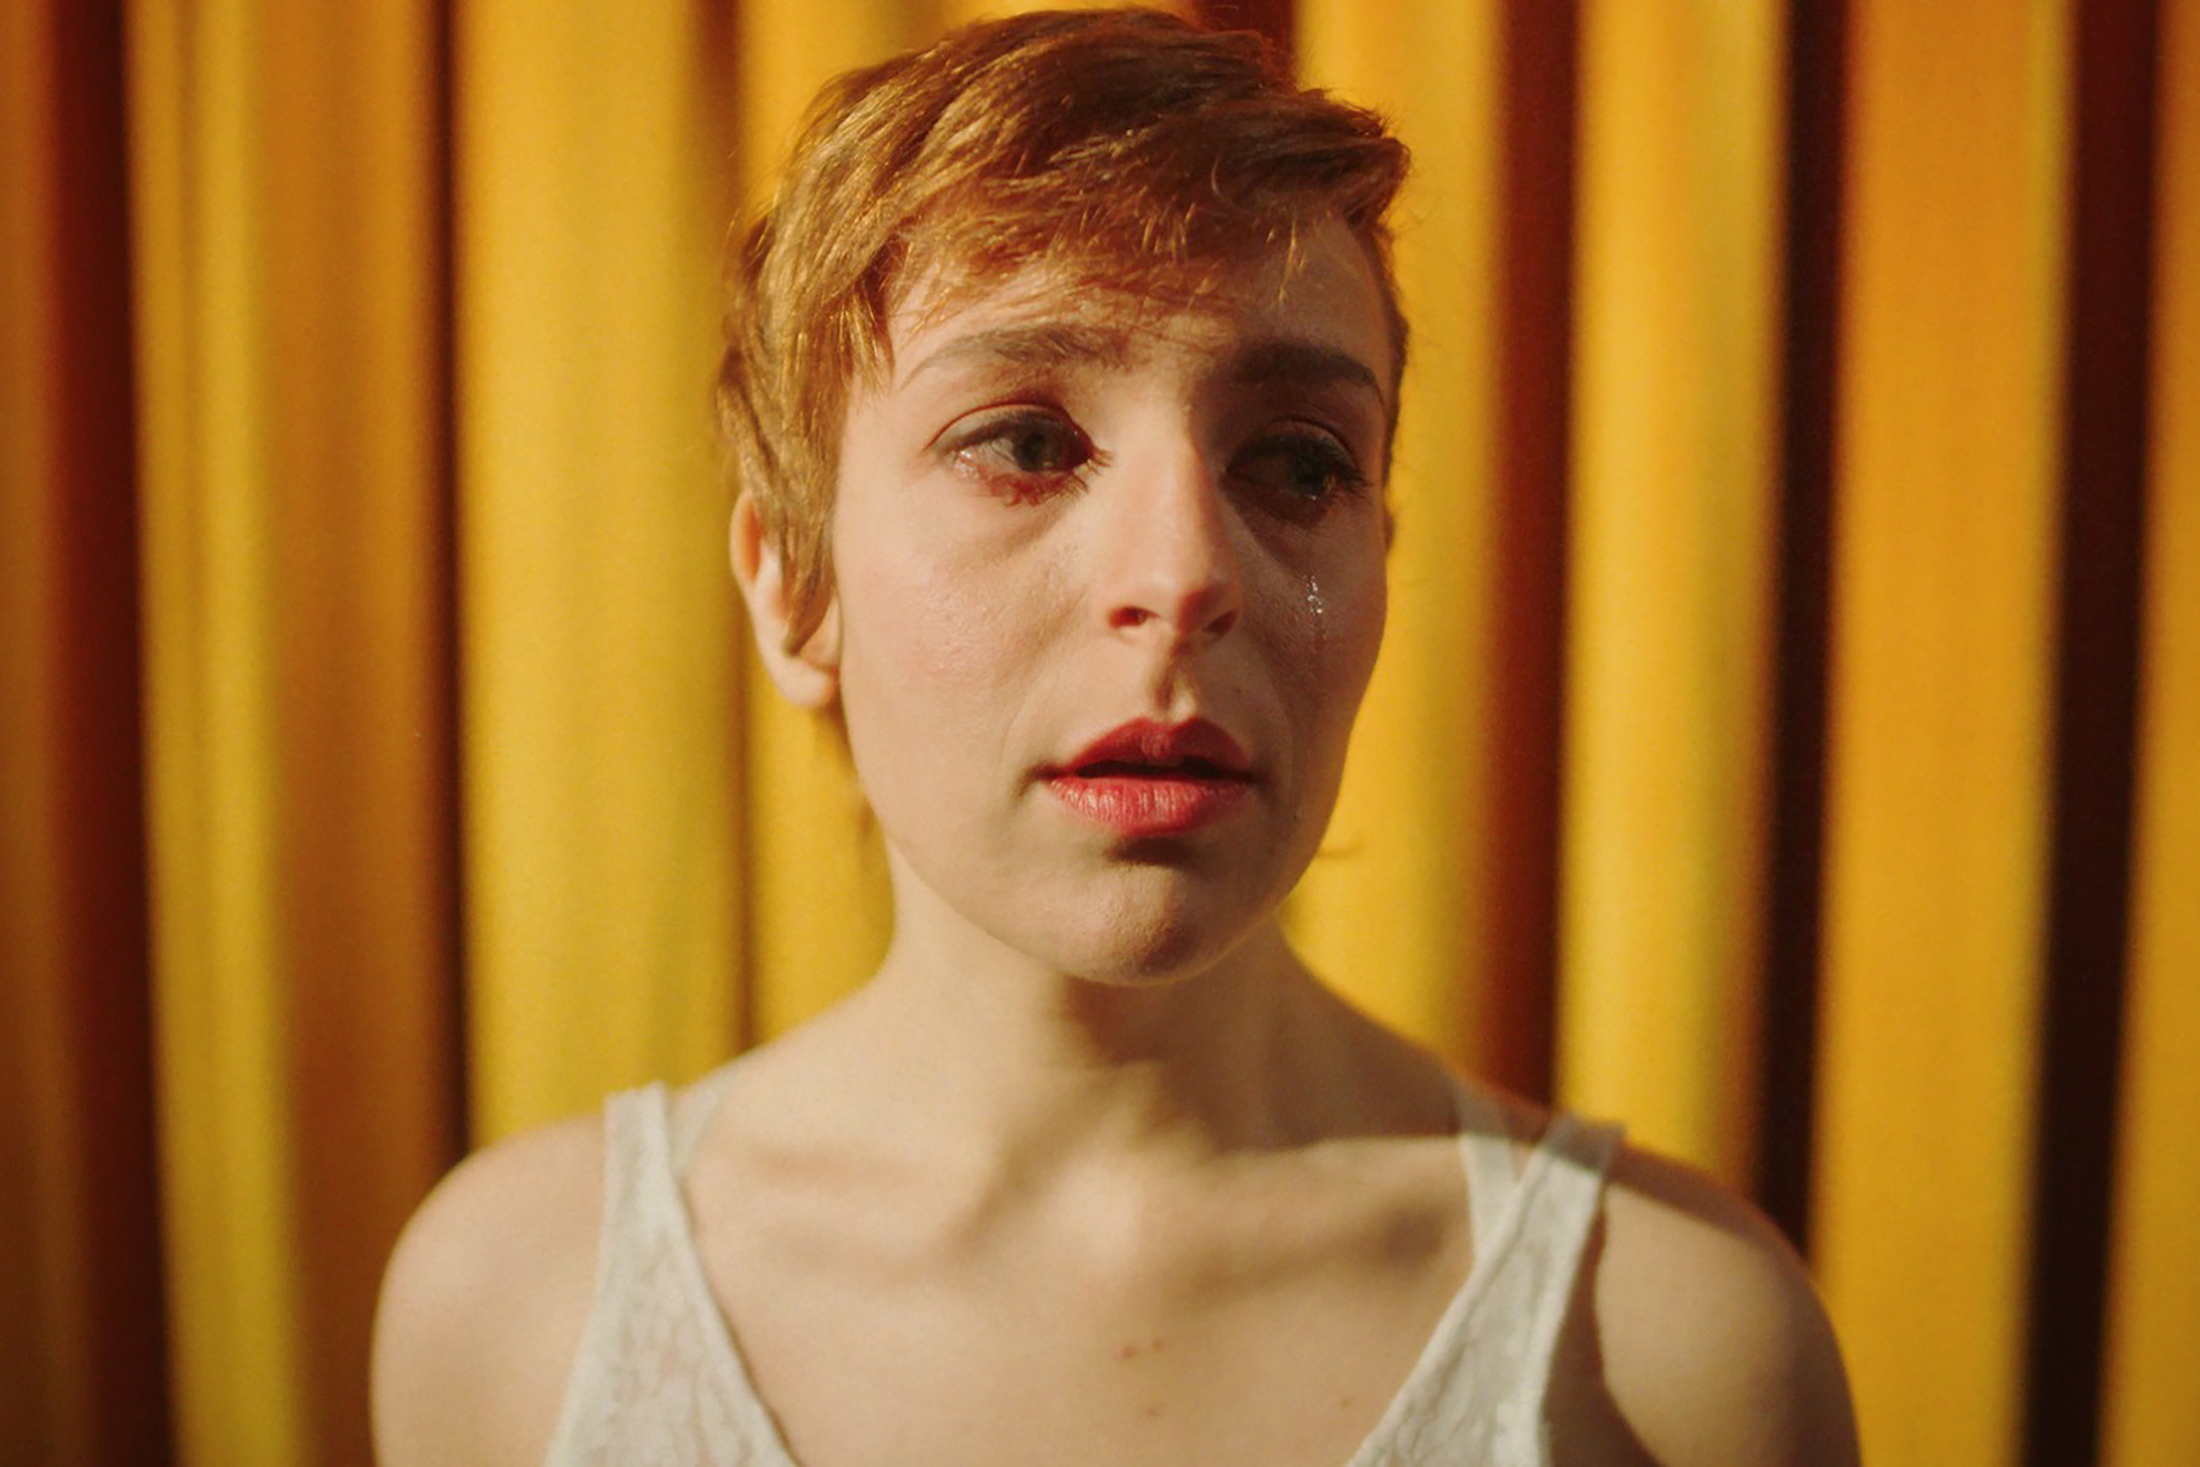 still from Bella Borgh film showing the protagonist crying